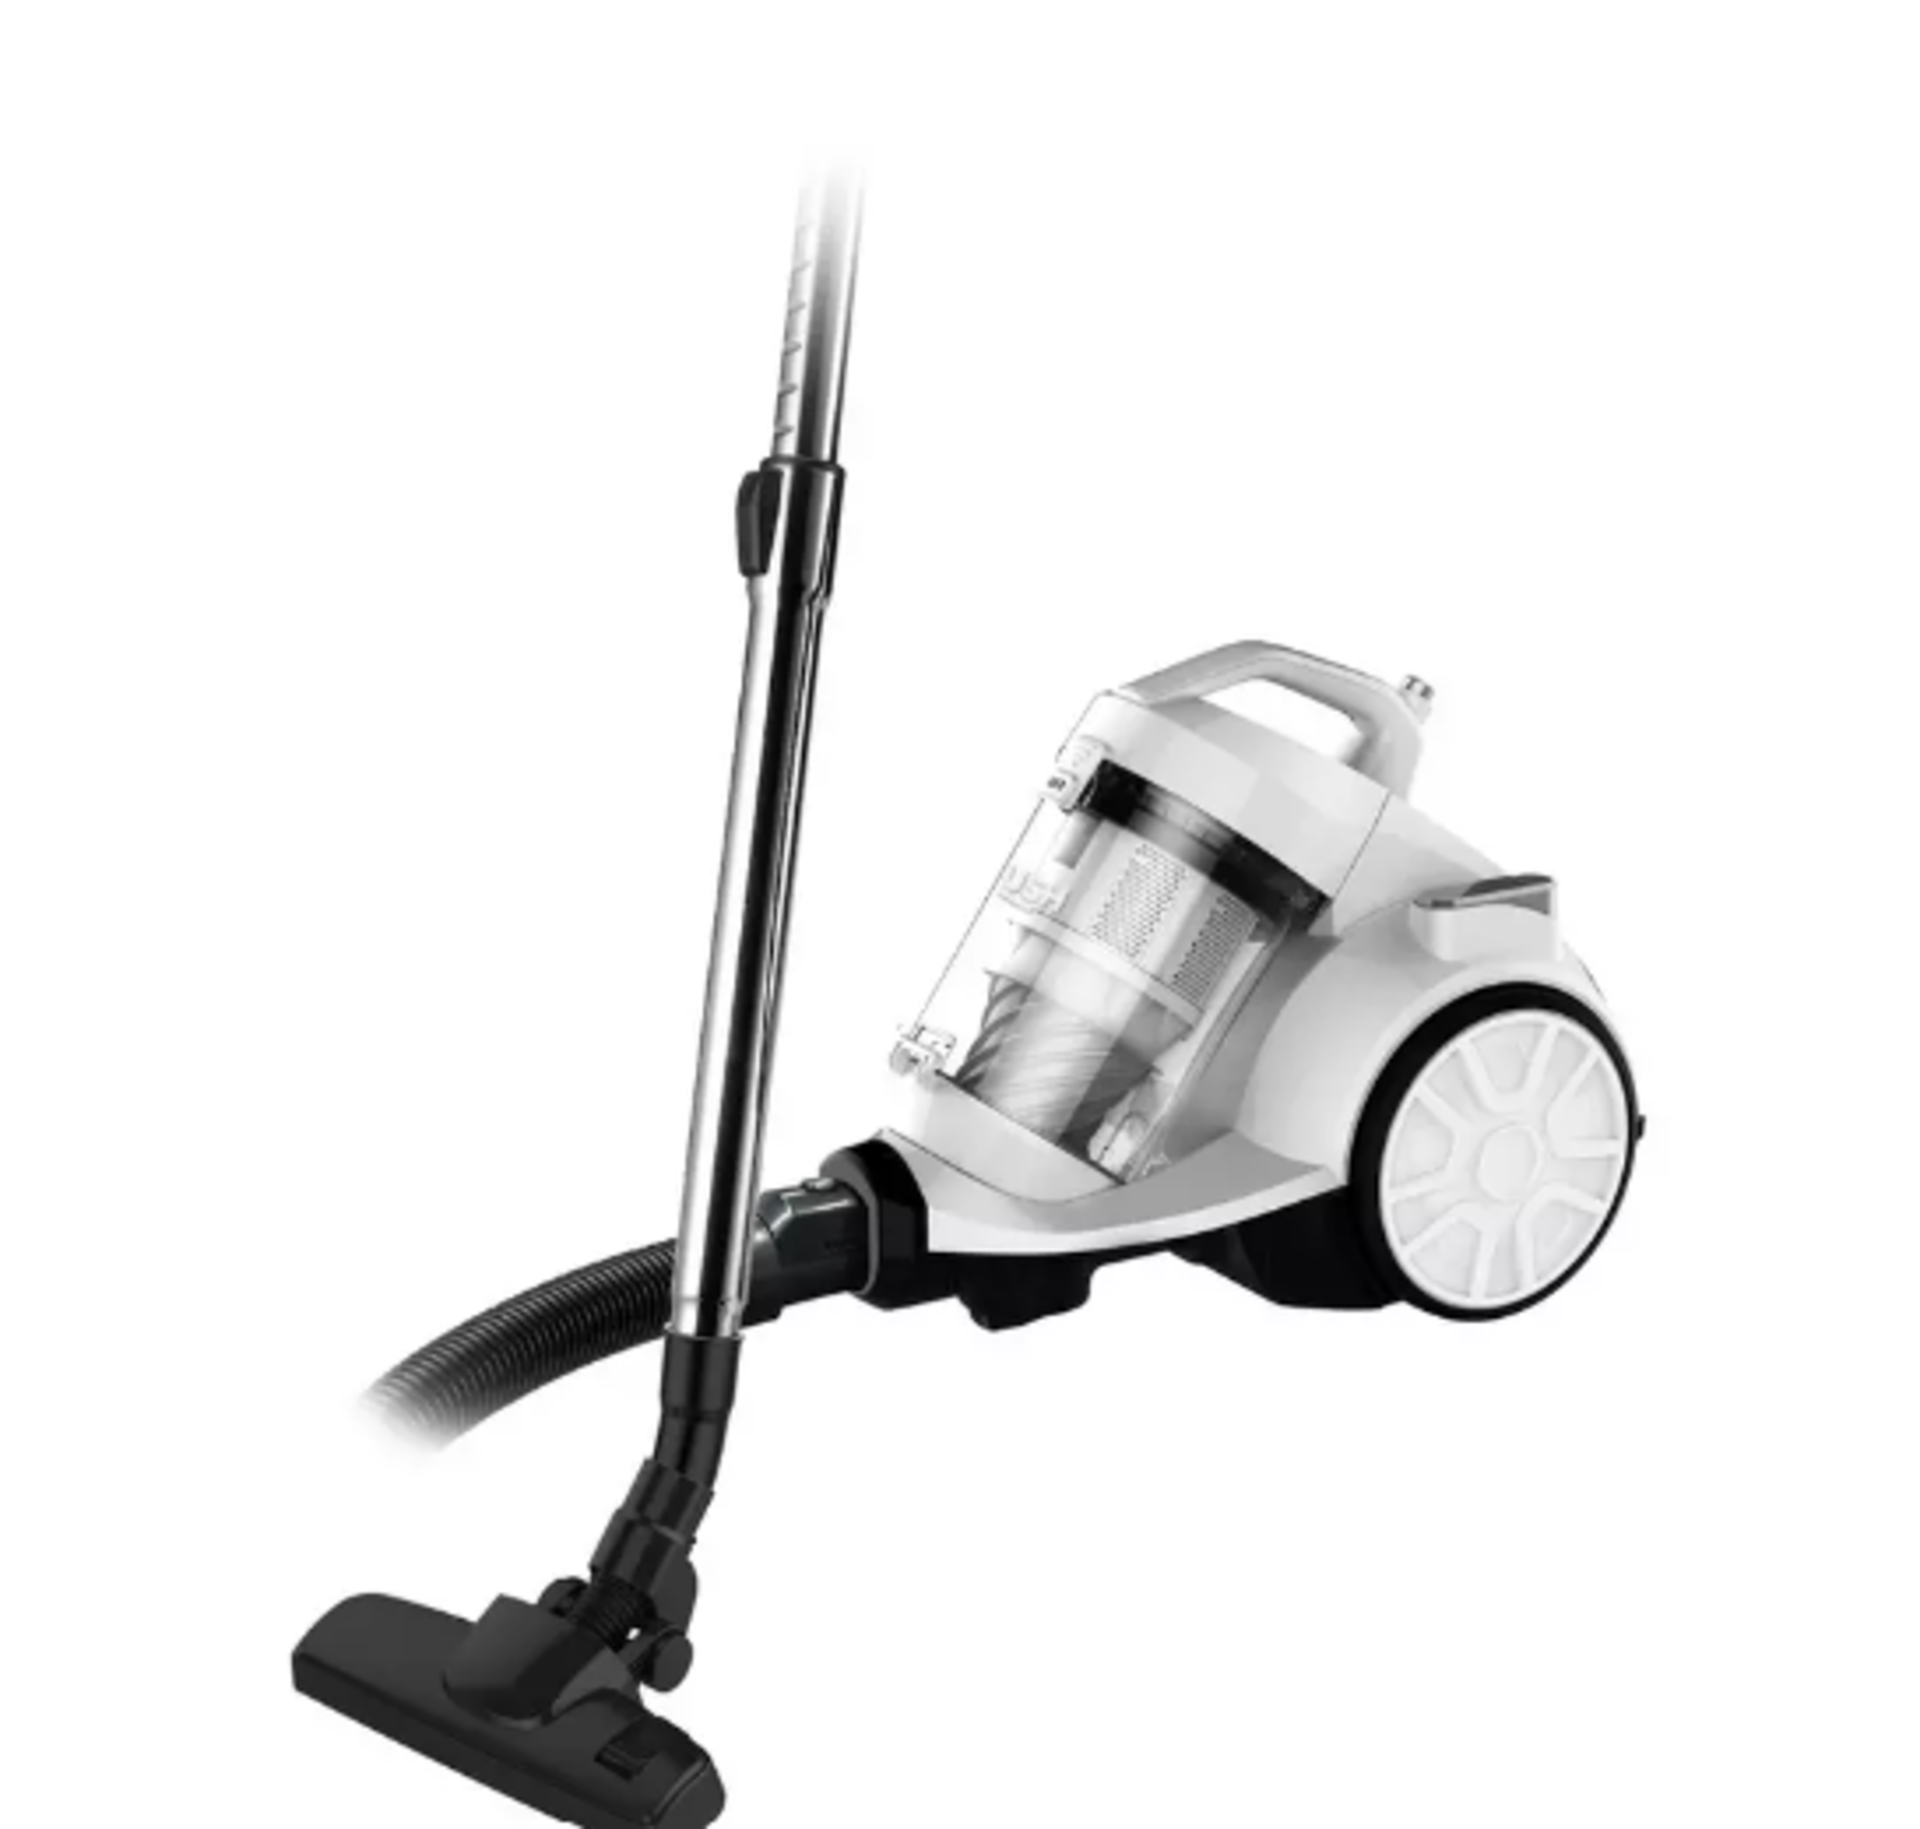 Bush Multi Cyclonic Bagless Cylinder Vacuum Cleaner. RRP £105.00. - EBR. *UNBOXED* Deal with dust